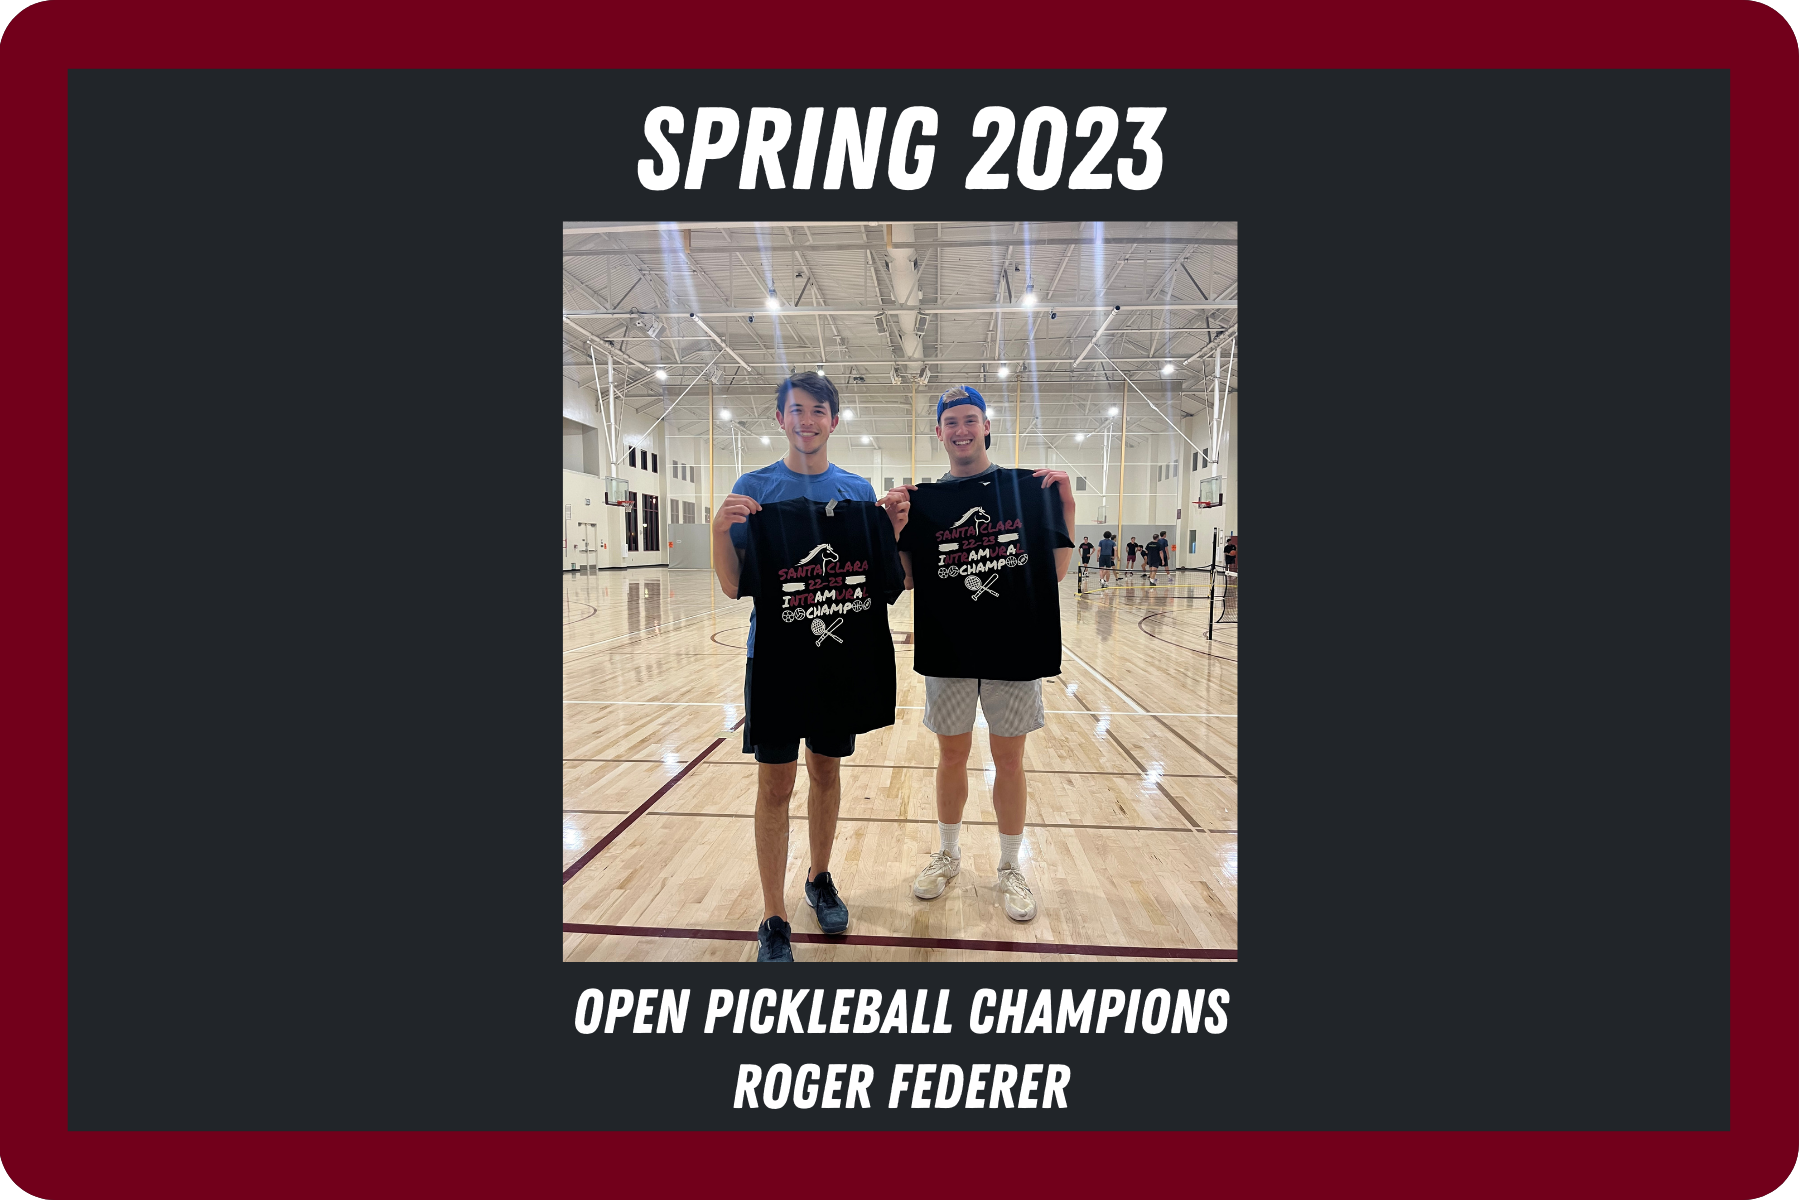 Two students pose with their Intramural champion tshirts after their winning pickleball game